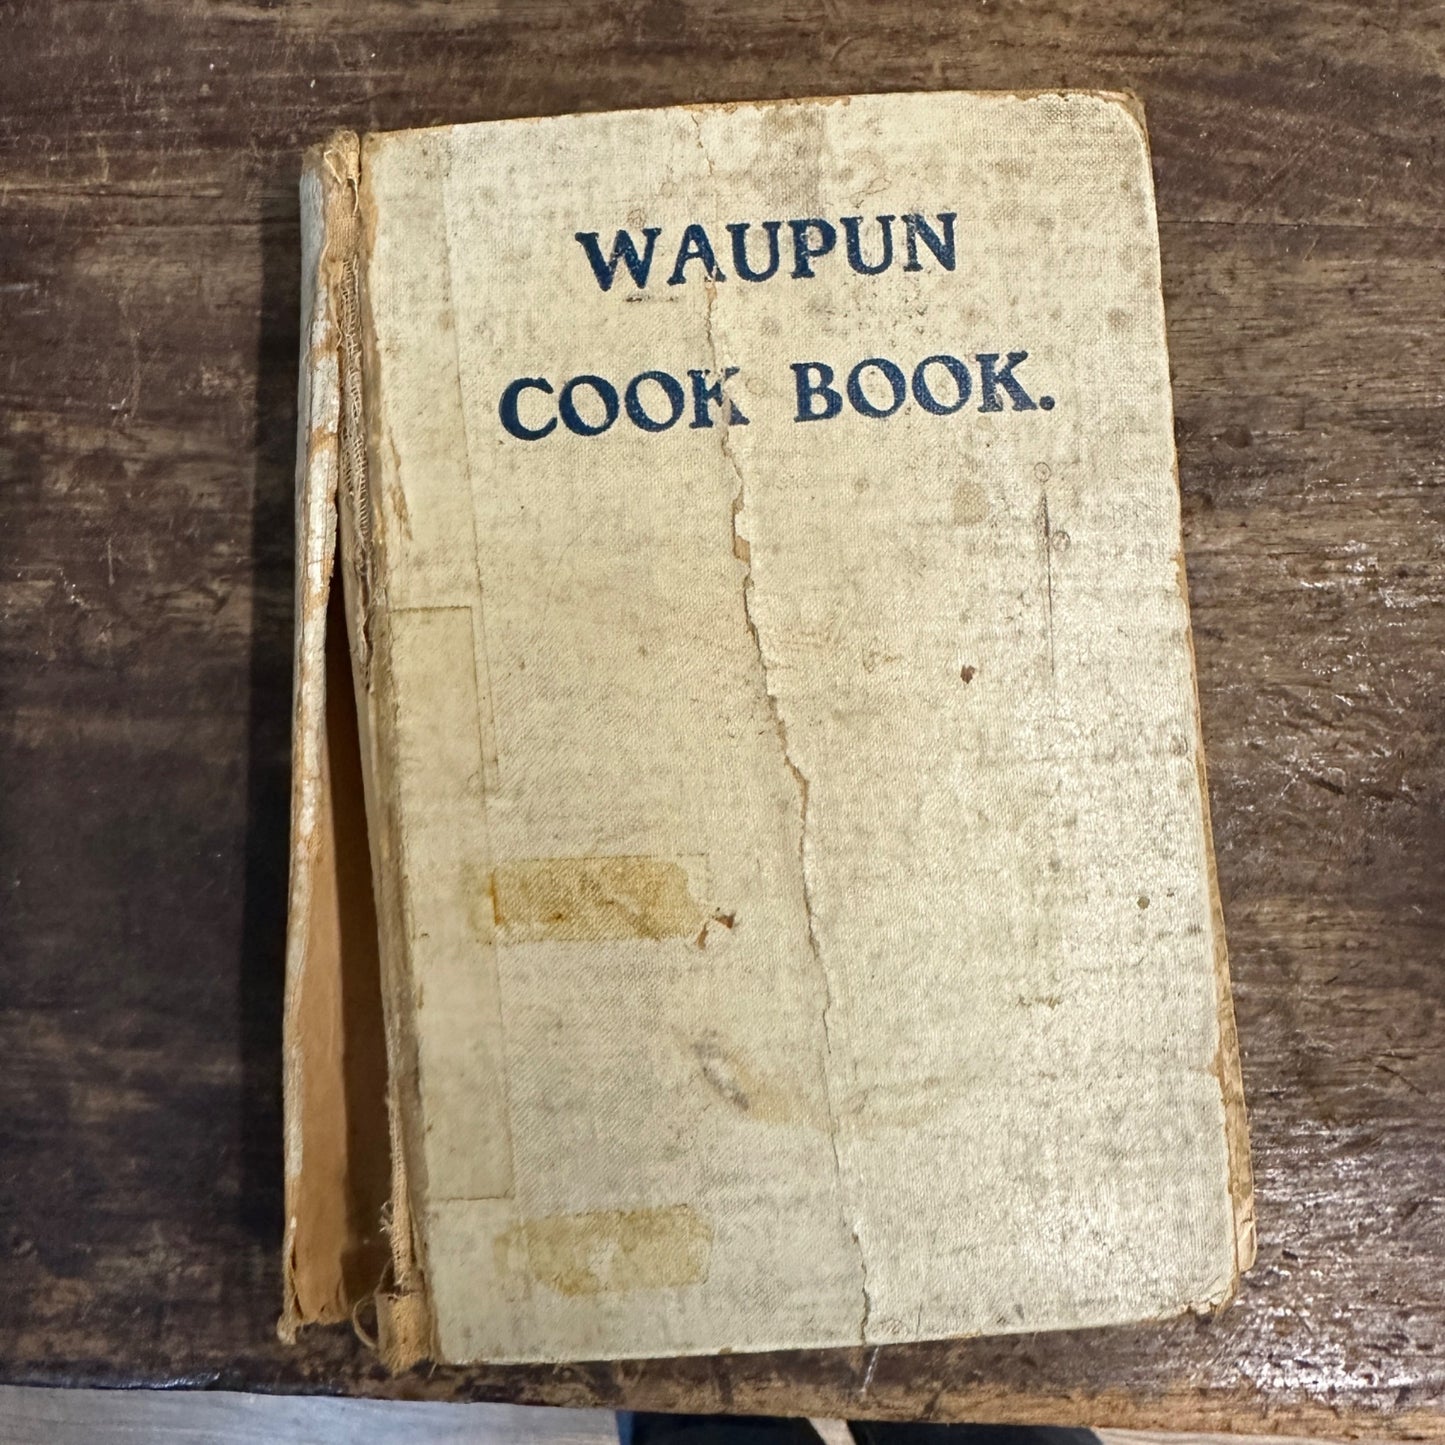 Vintage 1930s Waupun Cook Books Hardcover Receipe Books Wis Wisconsin